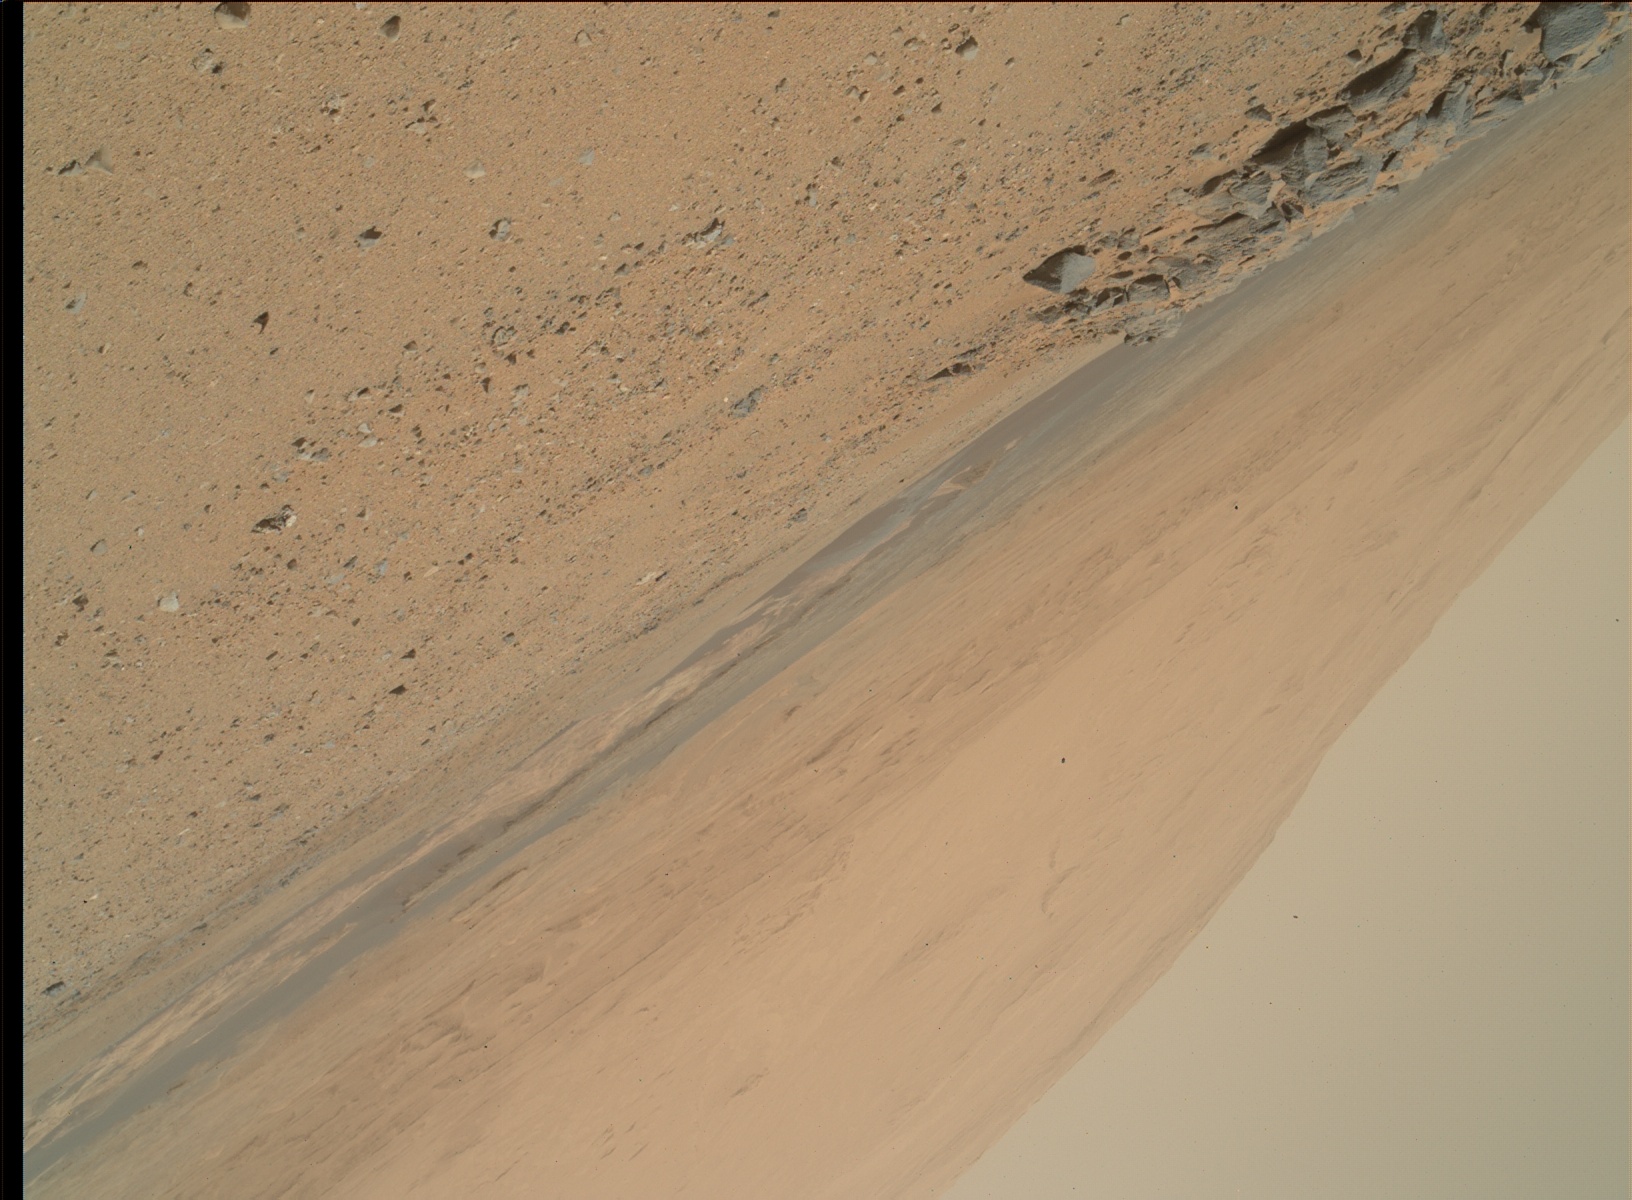 Nasa's Mars rover Curiosity acquired this image using its Mars Hand Lens Imager (MAHLI) on Sol 345